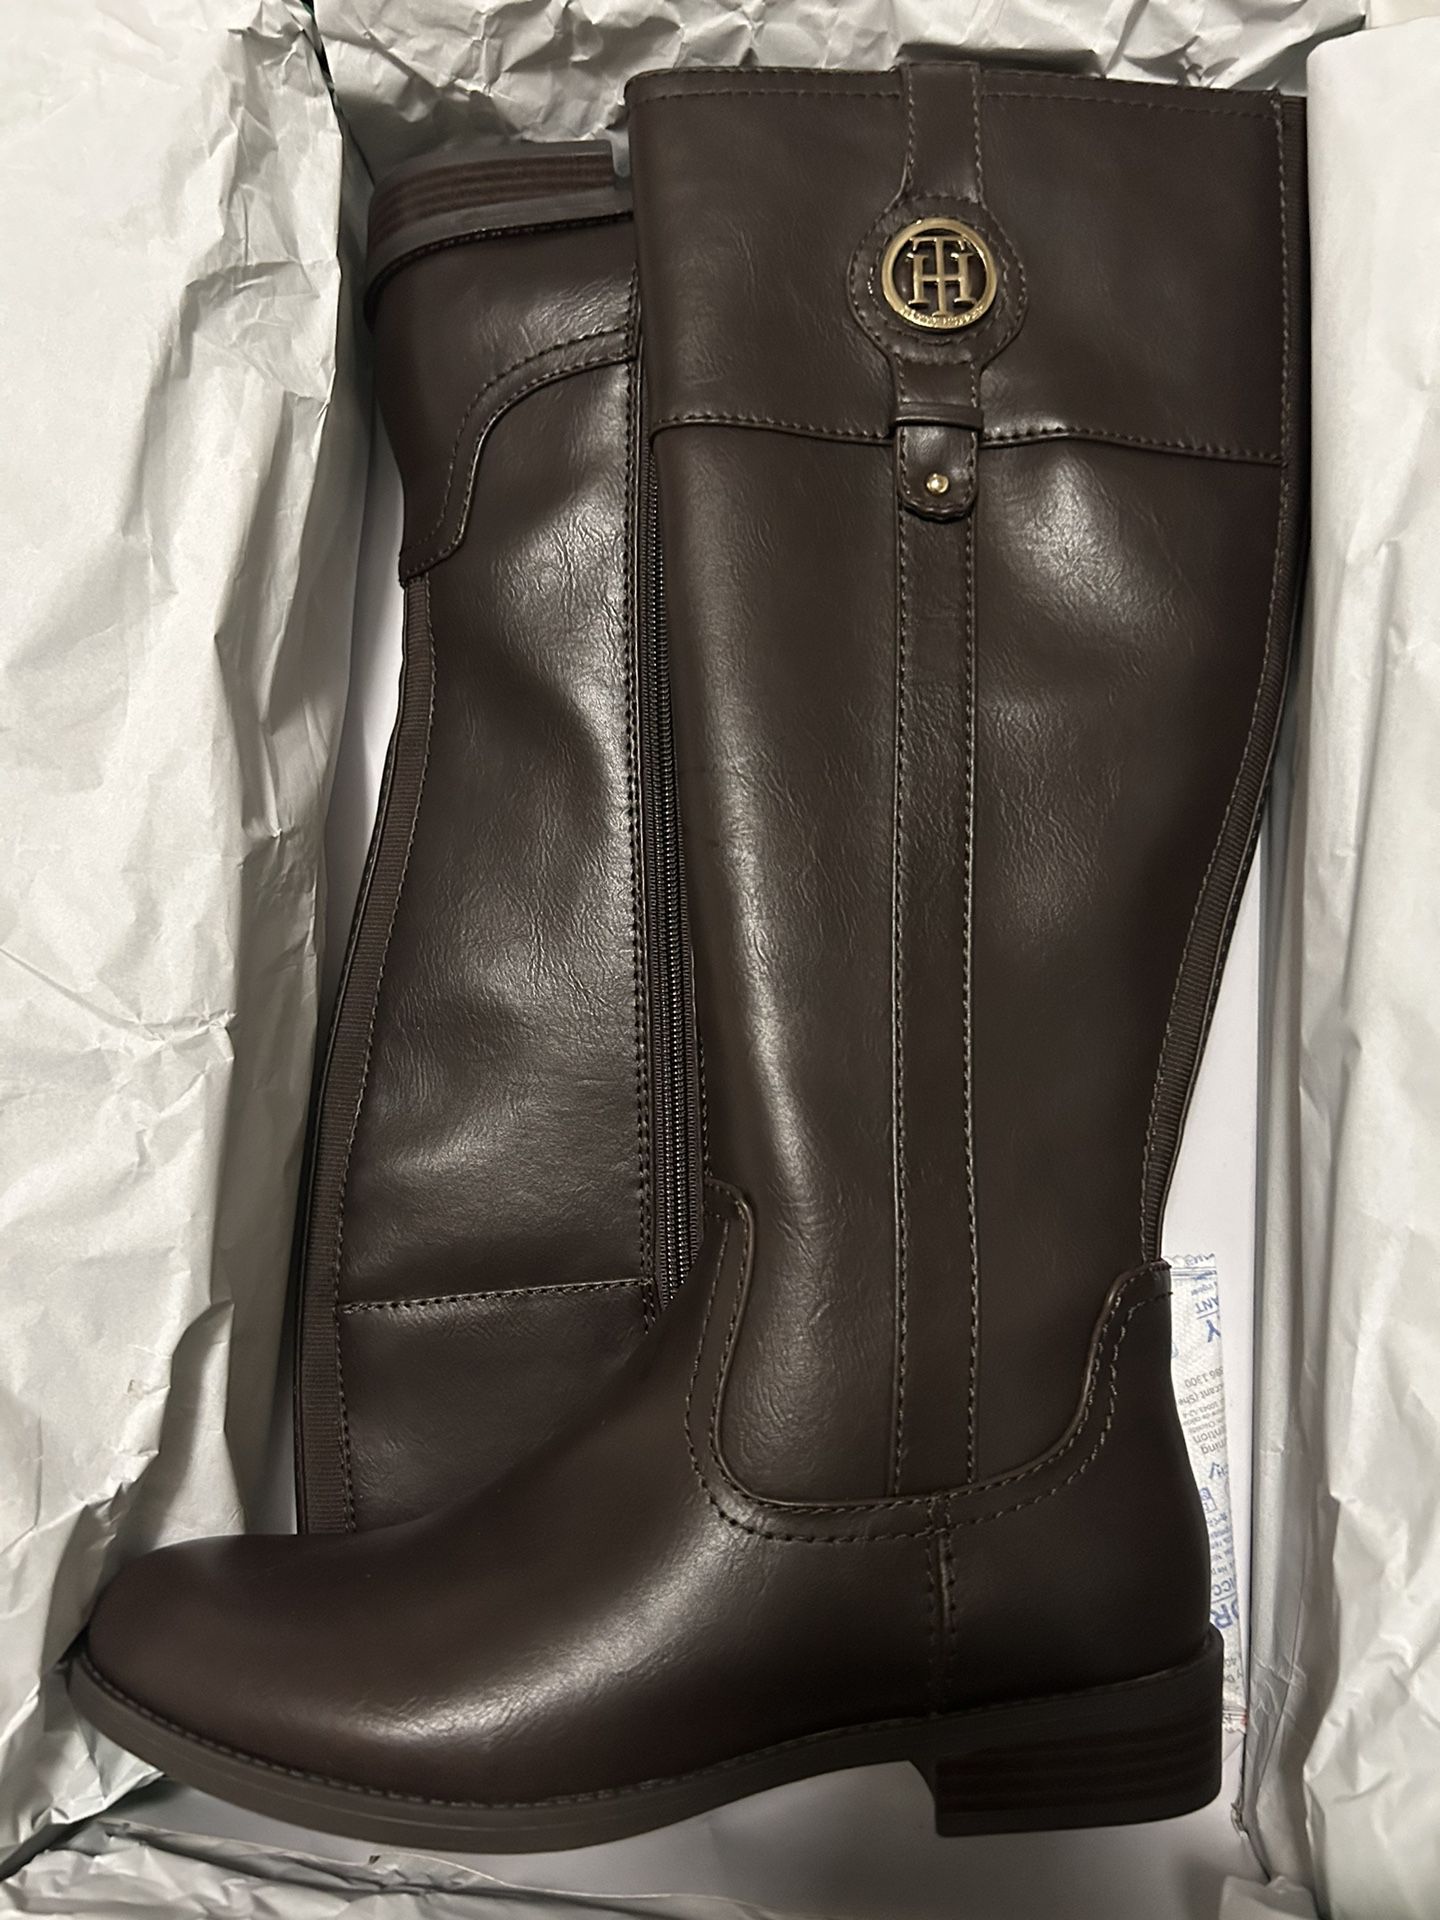 Brown Tommy Hilfiger Boots Sale in Delano, CA - OfferUp